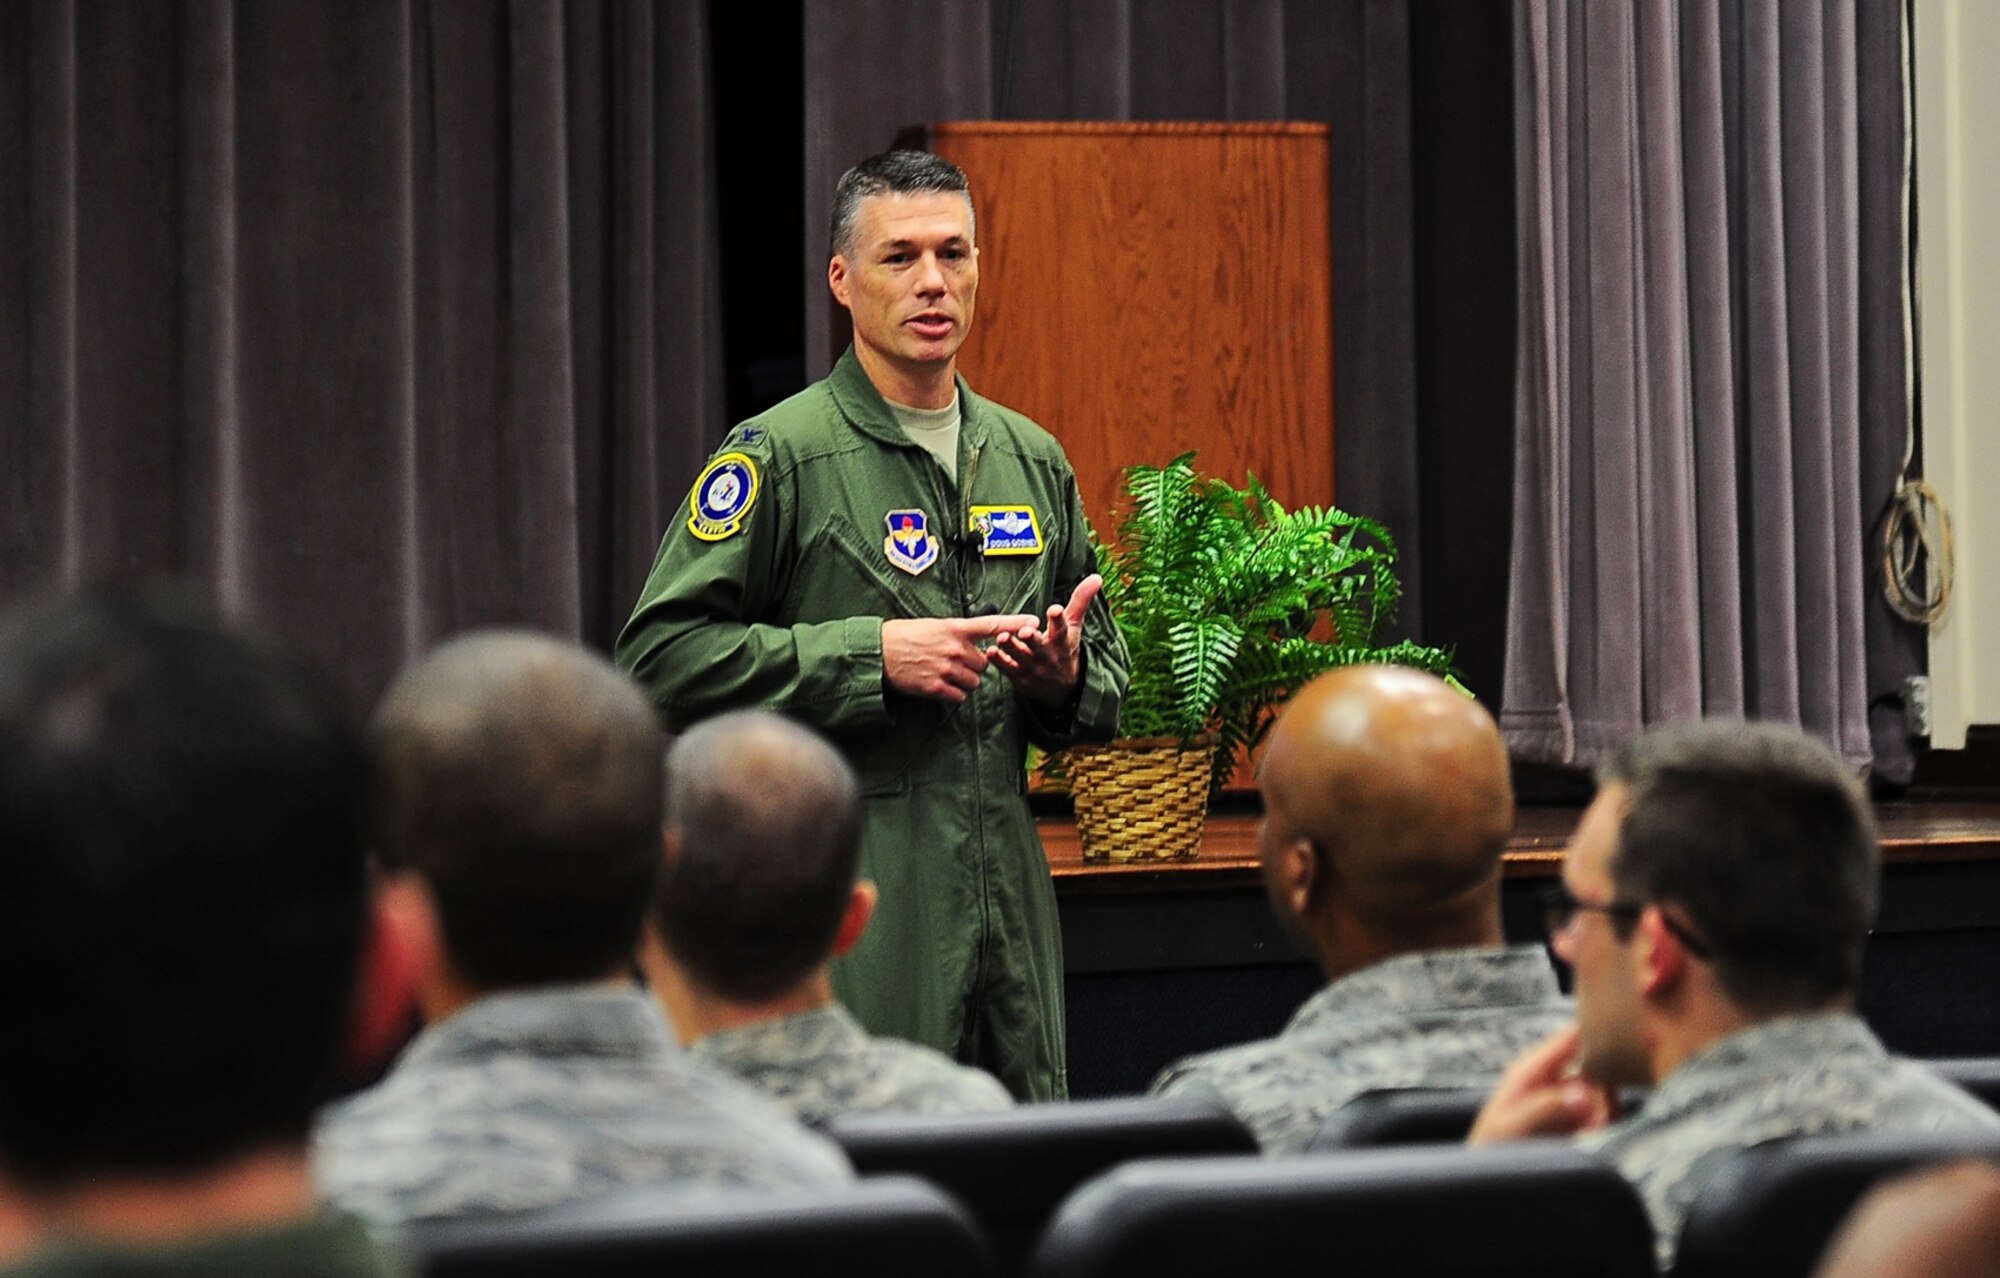 Col. Douglas Gosney, 14th Flying Training Wing Commander, speaks to Team BLAZE personnel during an all call Aug. 25 at Columbus Air Force Base, Mississippi. Gosney used to opportunity to introduce himself and his family. He then explained what he values most in people such as Integrity, Teamwork, Respect, Discipline, attention to detail, and loyalty. (U.S. Air Force photo/Staff Sgt. Stephanie Englar)